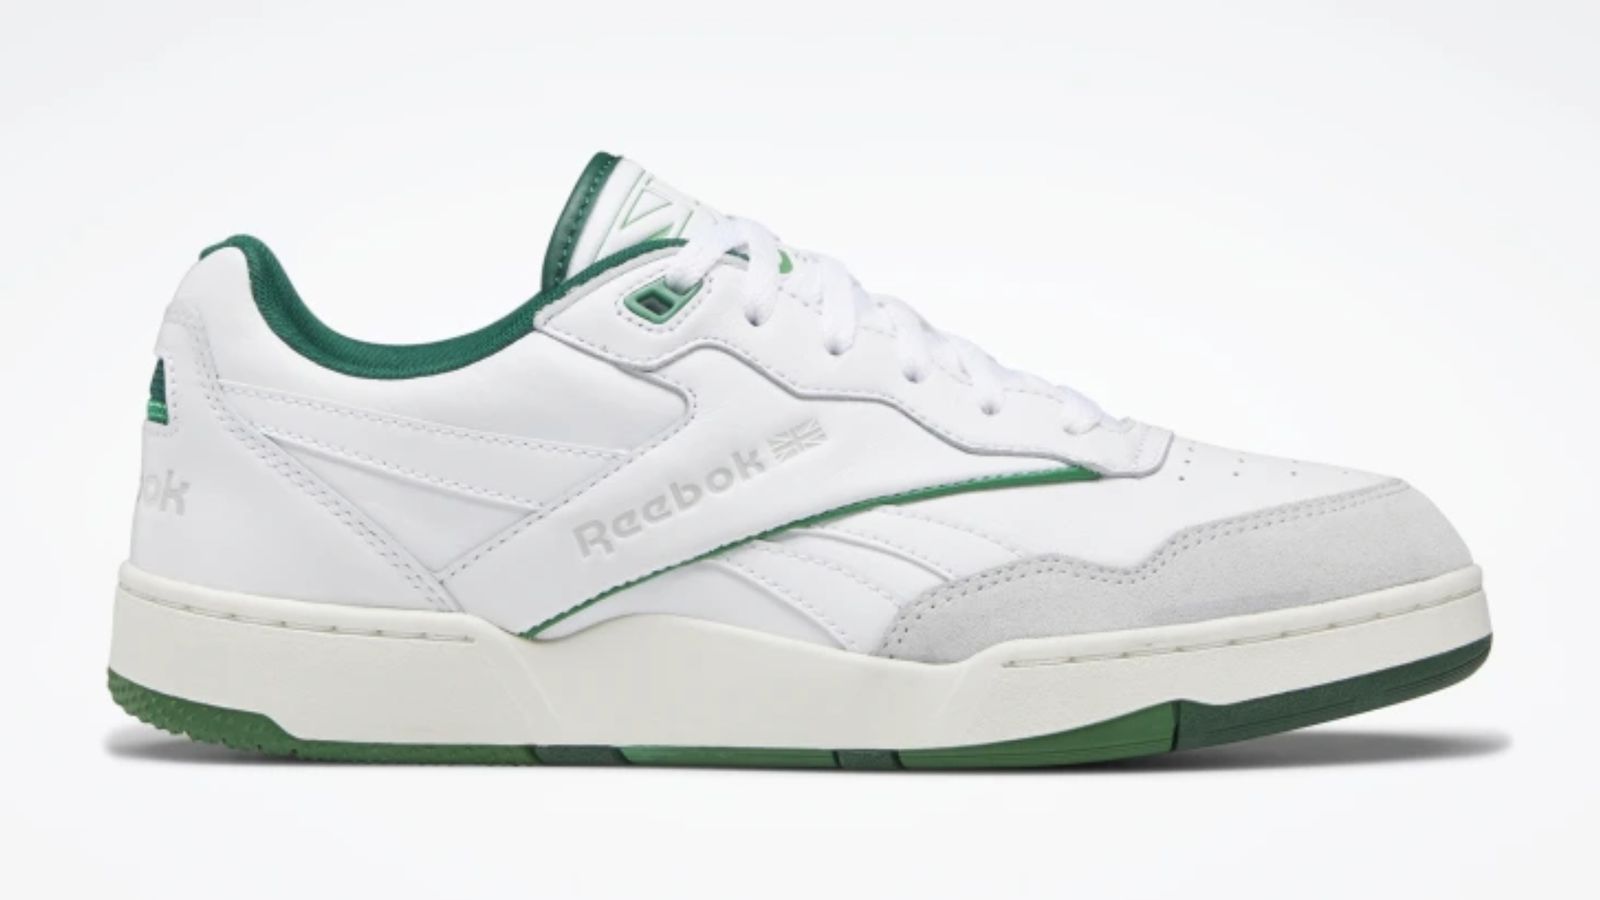 Reebok BB 4000 II product image of a white and grey shoe with green accents.